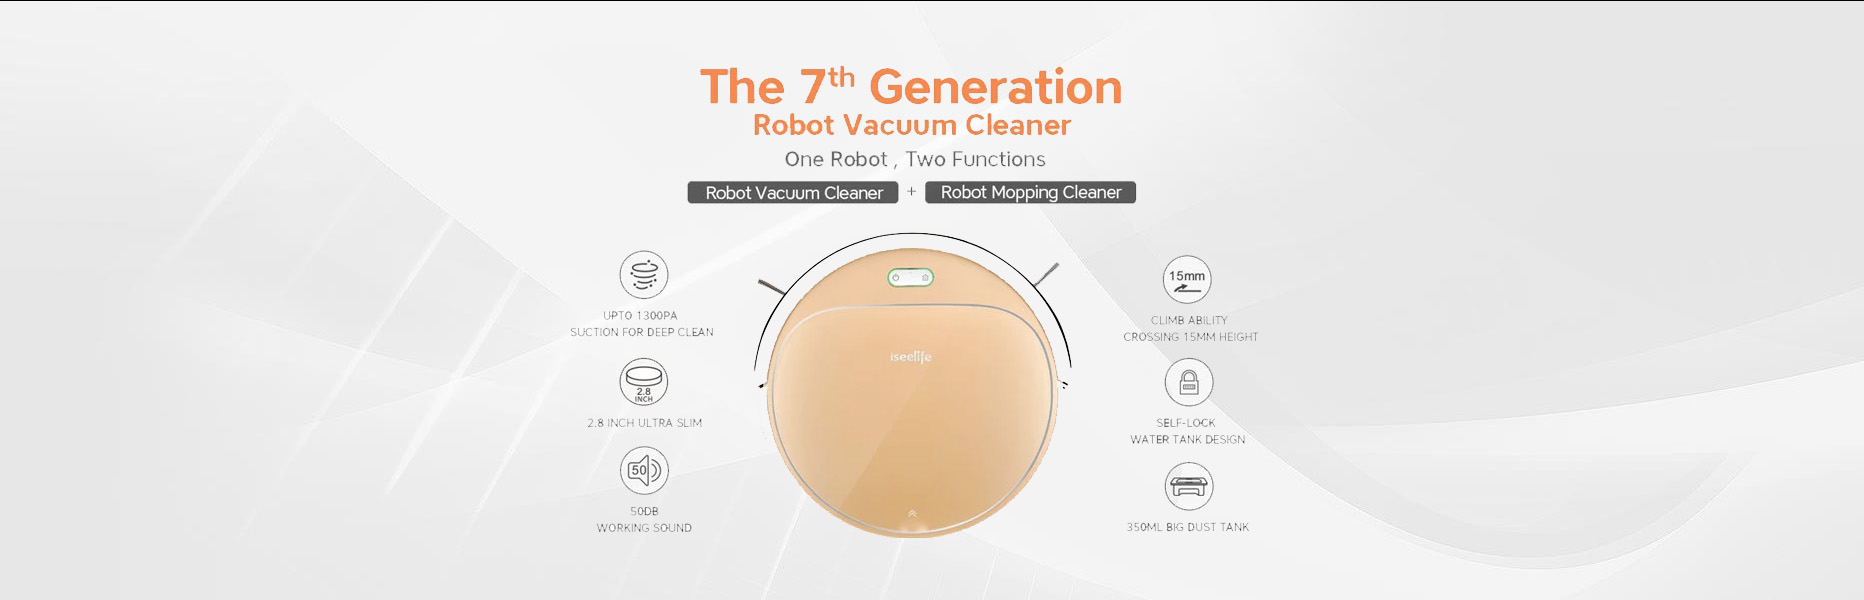 Sweep /Vacuum/Mop 3 stages cleaning procedure dry and wet robot vacuum cleaner